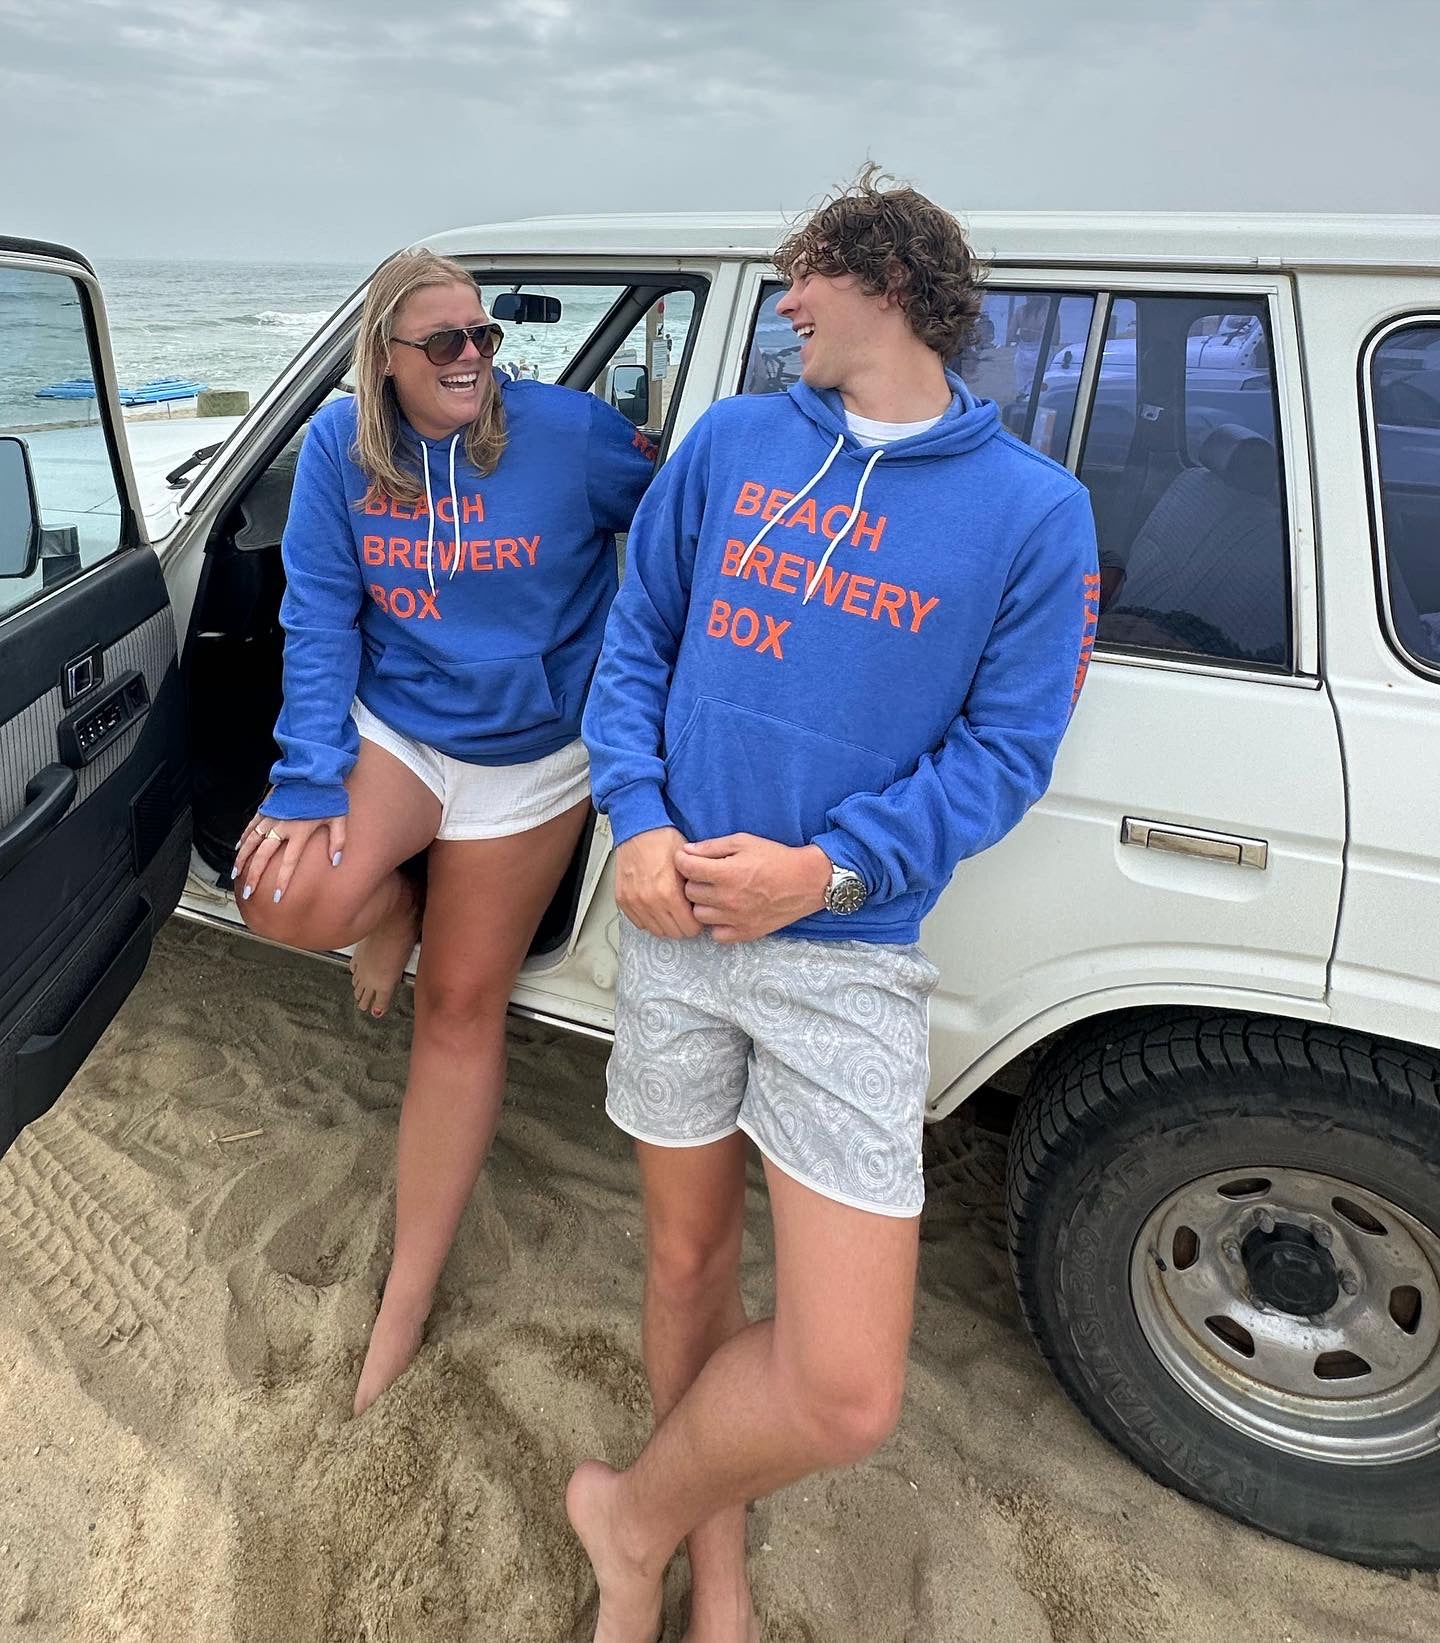 Happy Place Blue Beach Brewery Box Hoodie